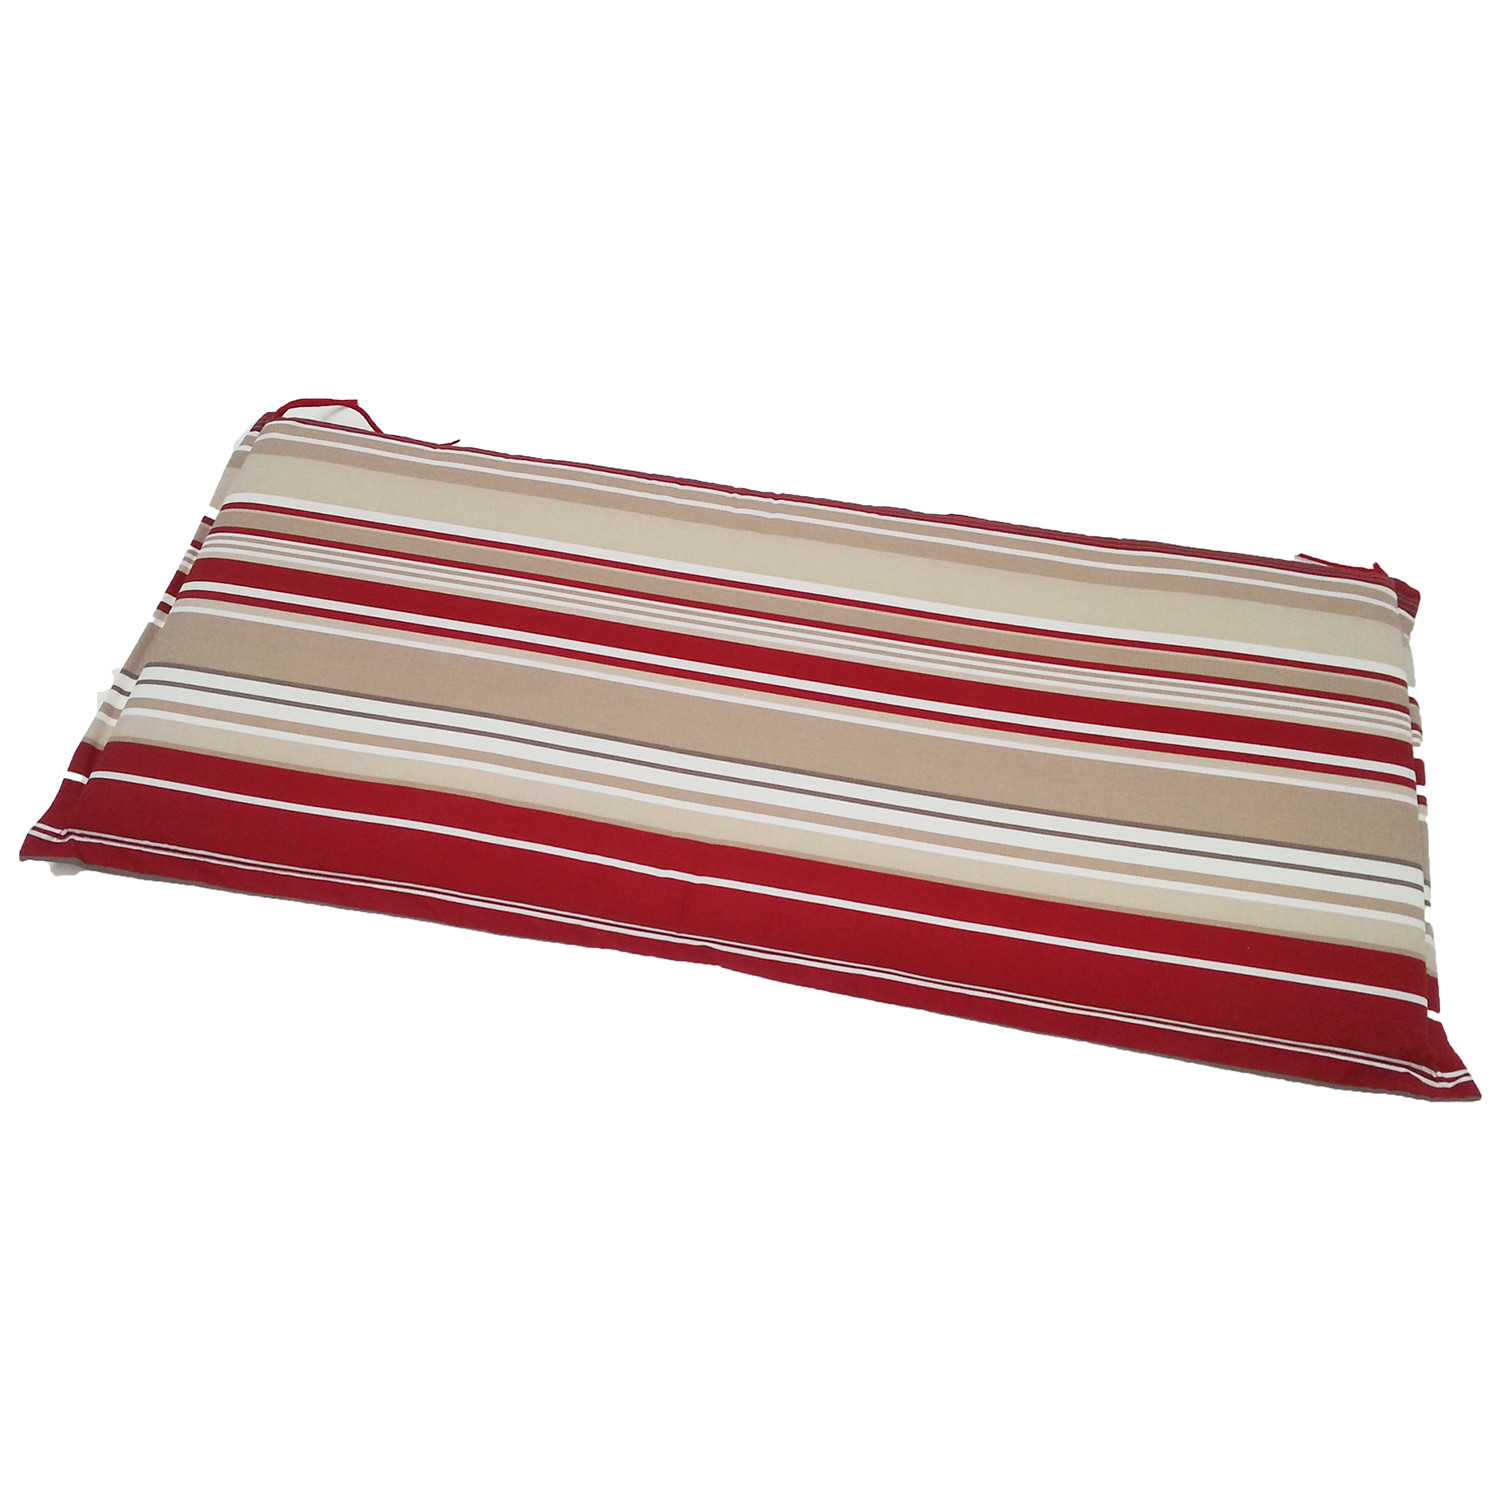 Striped Valance Cushion - 3 Seater Bench Image